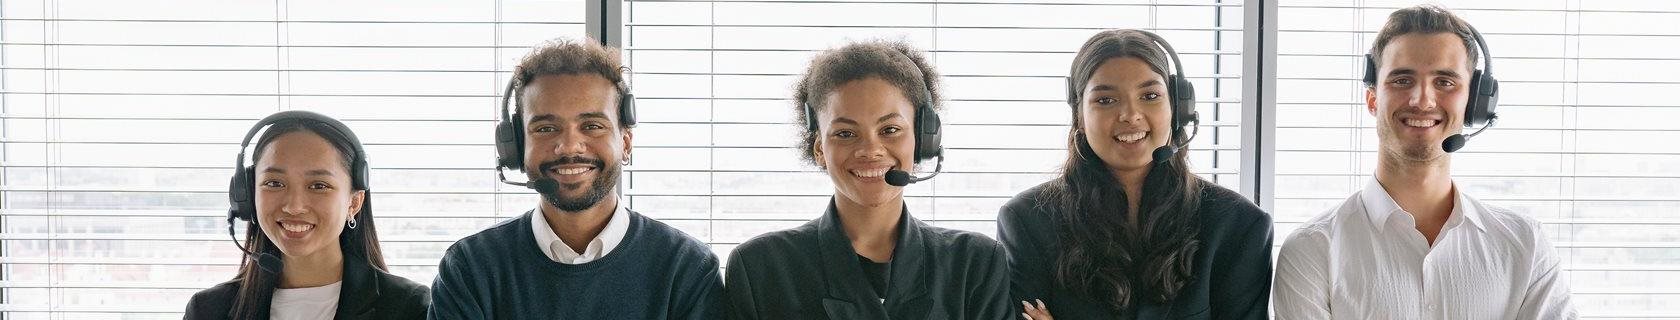 group of workers wearing headsets